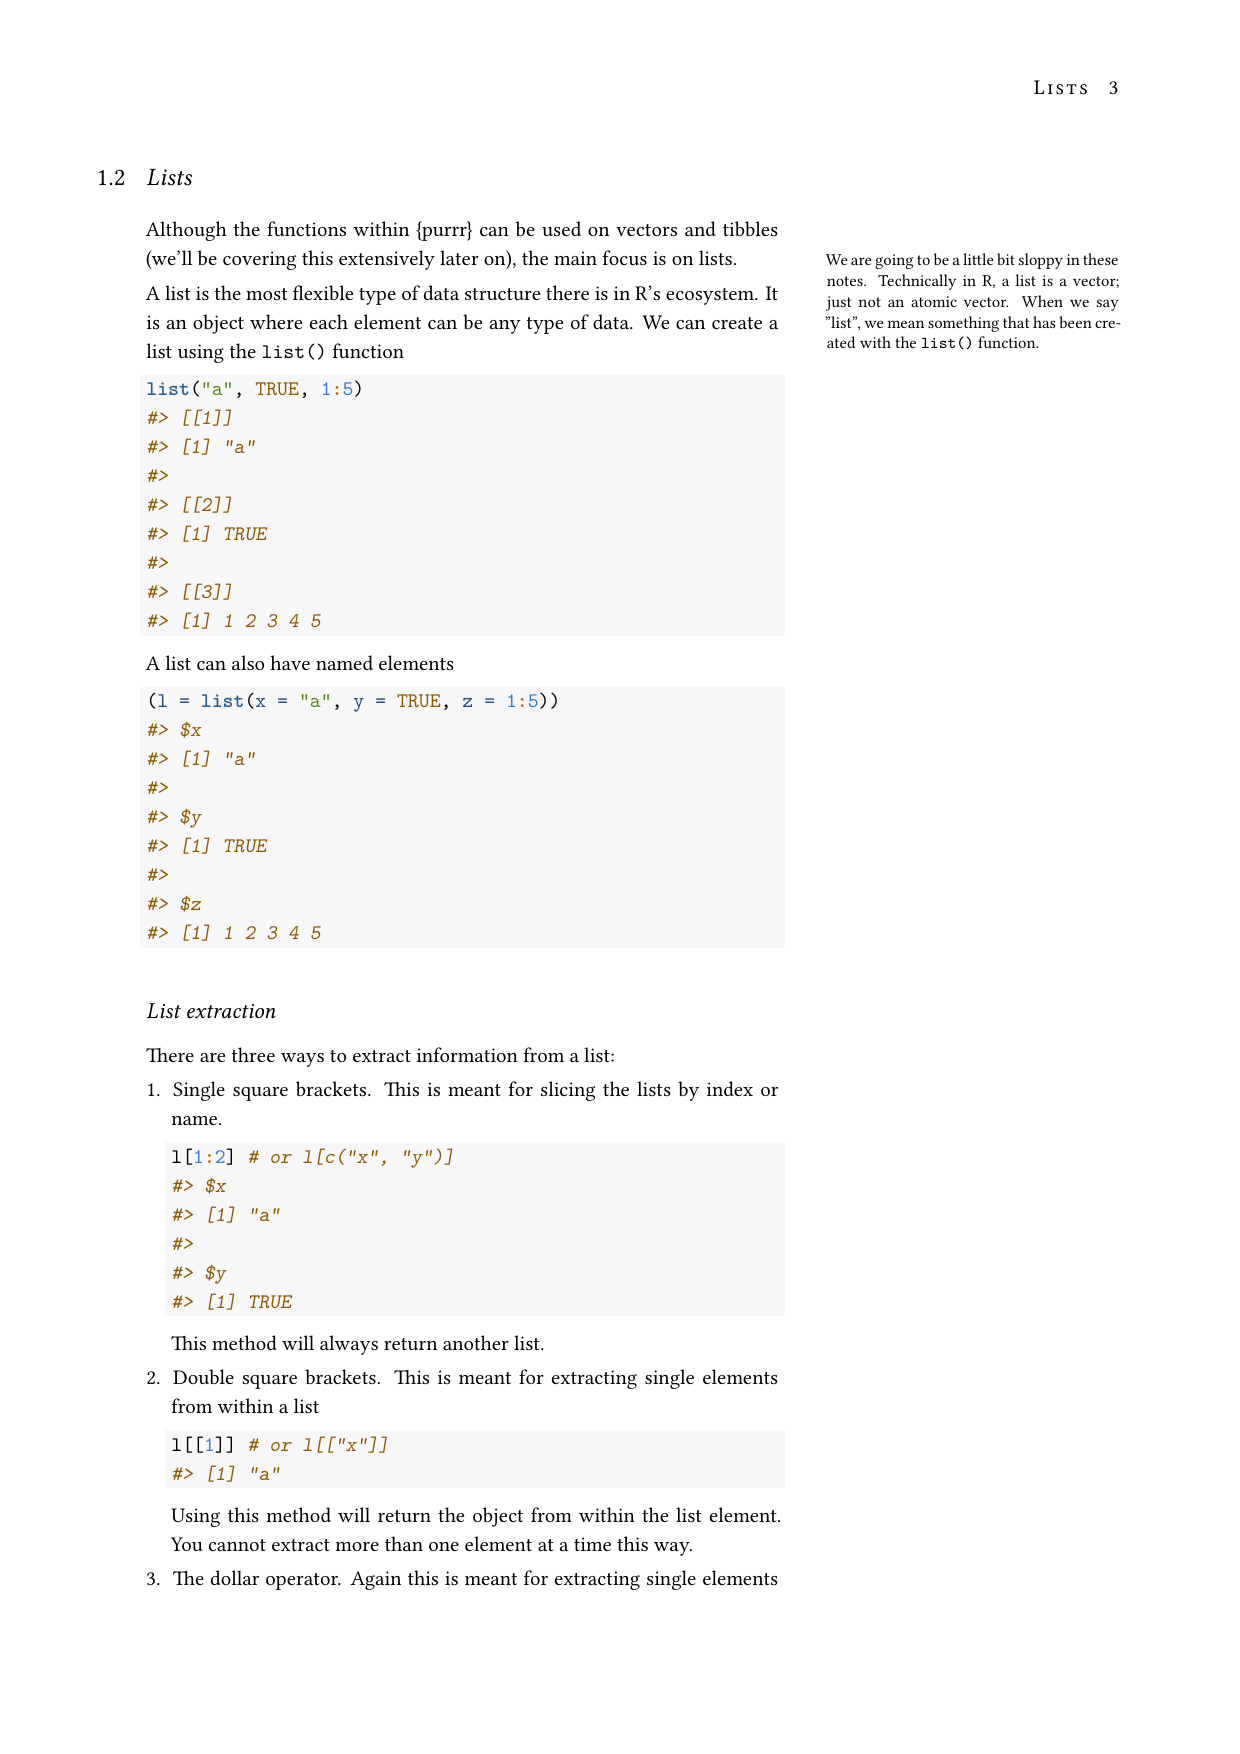 Page 3 of example course material for  Functional Programming with {purrr}